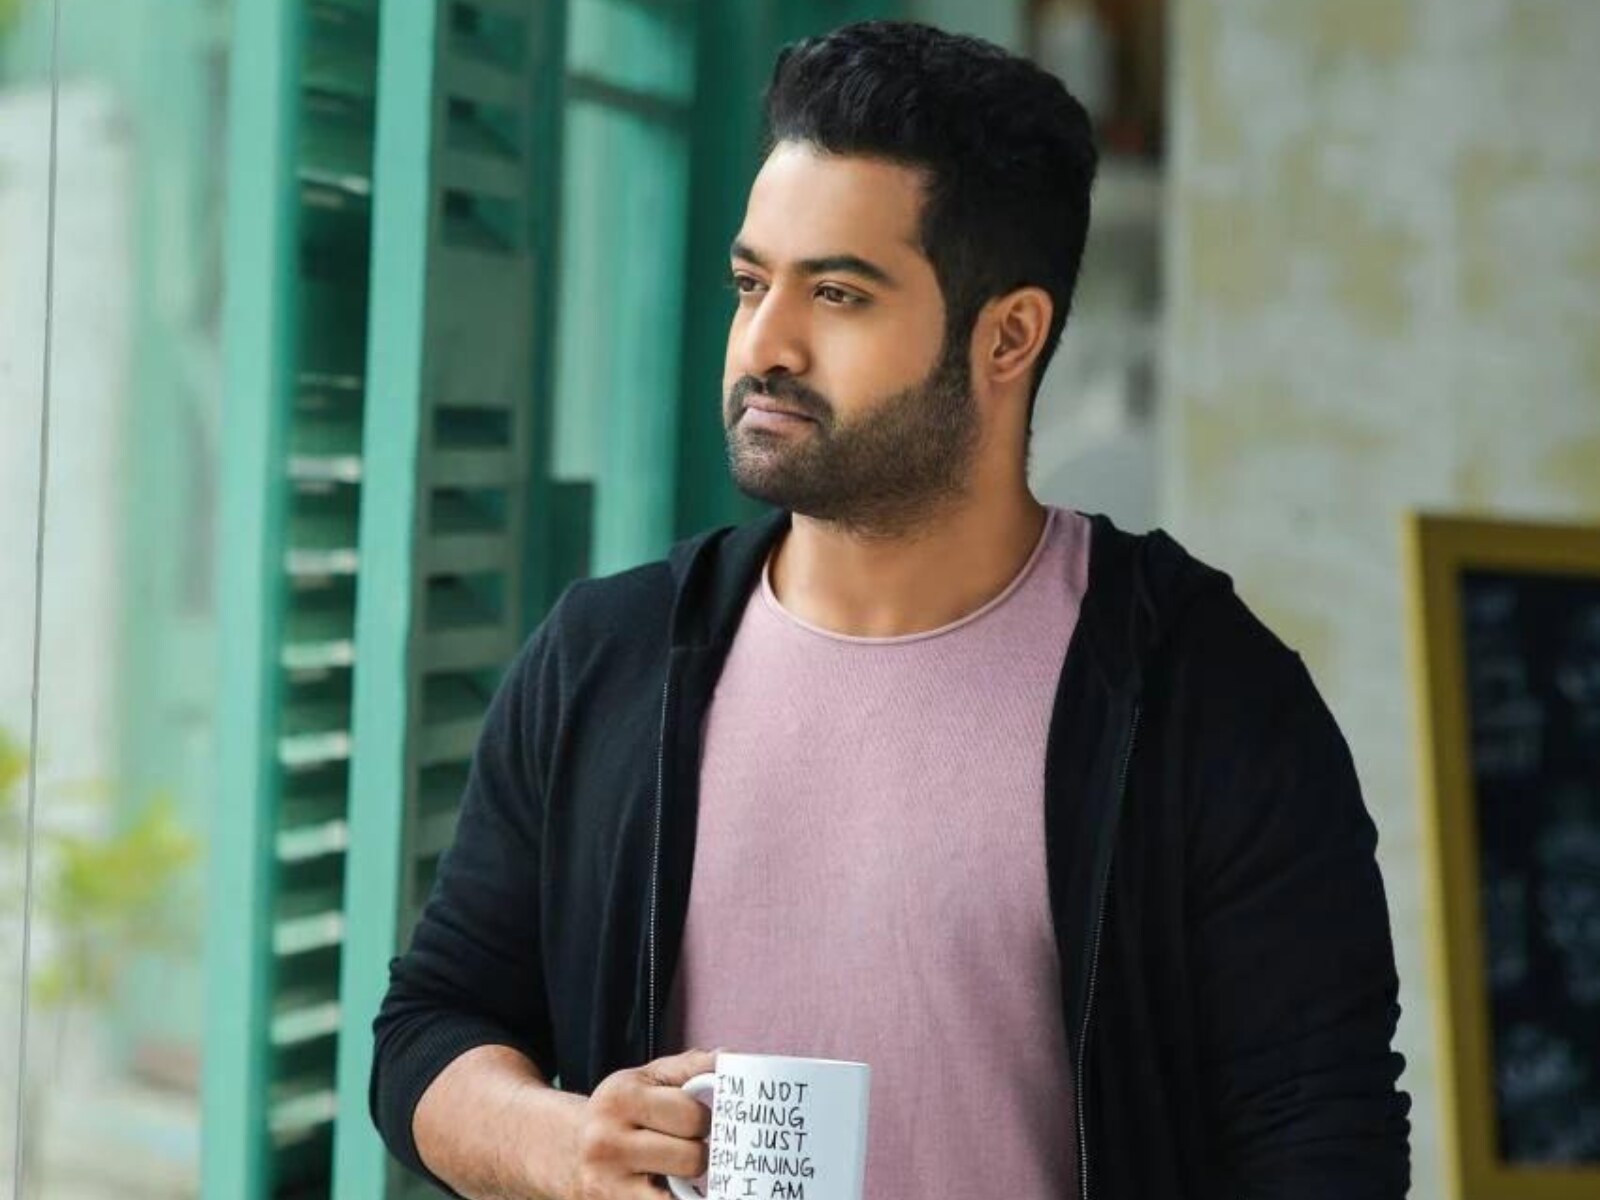 20 days crucial schedule for NTR in Mumbai